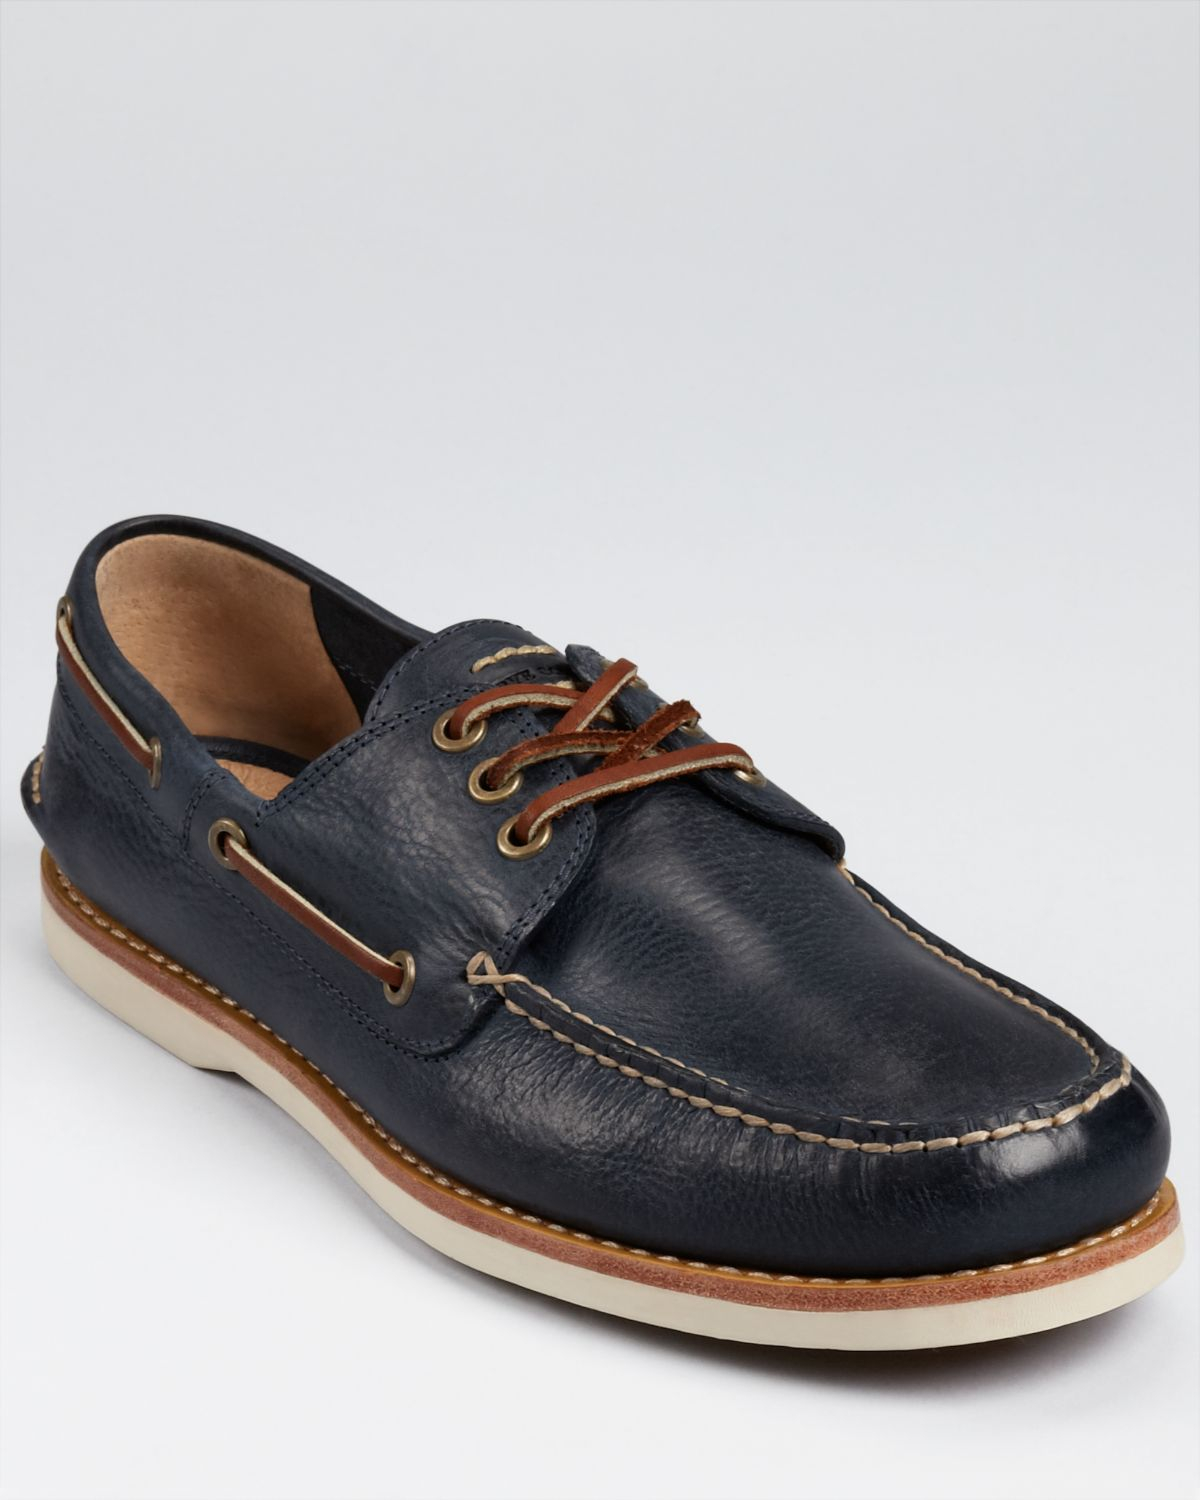 Lyst - Frye Sully Boat Shoes in Blue for Men